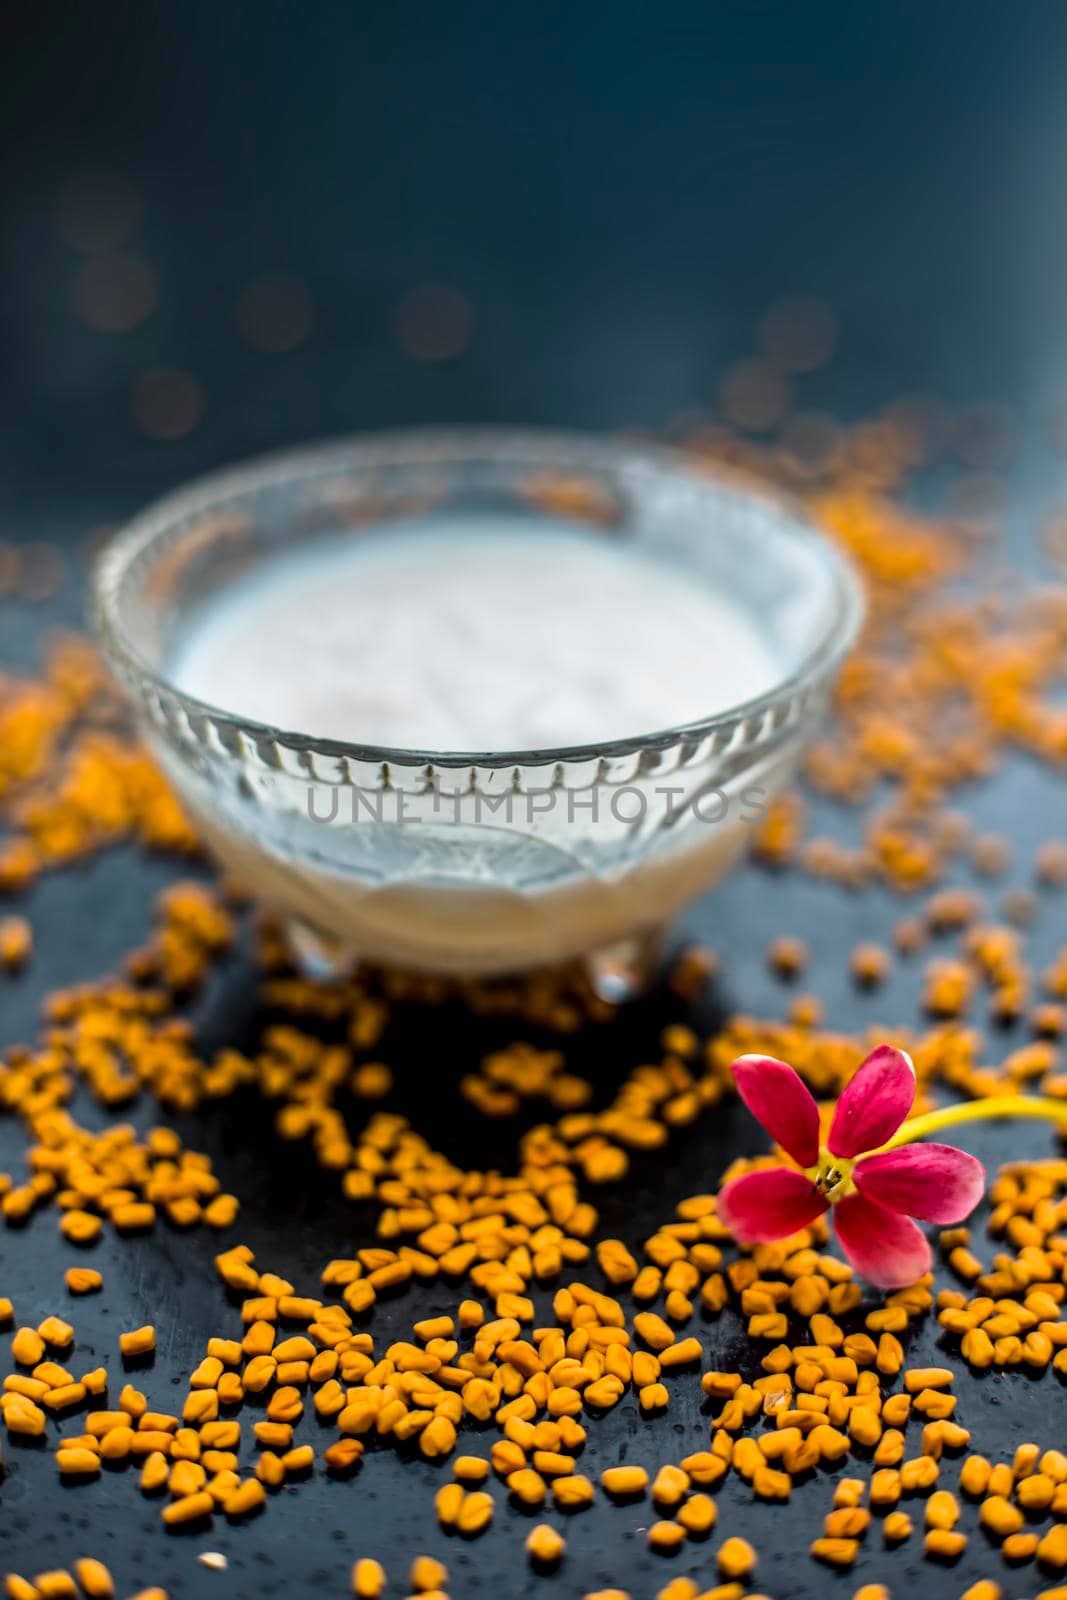 A famous natural method for dandruff on wooden surface in a glass bowl consisting of fenugreek seeds powder well-mixed with curd in a glass bowl.Along with raw curd and fenugreek seeds on the surface. by mirzamlk